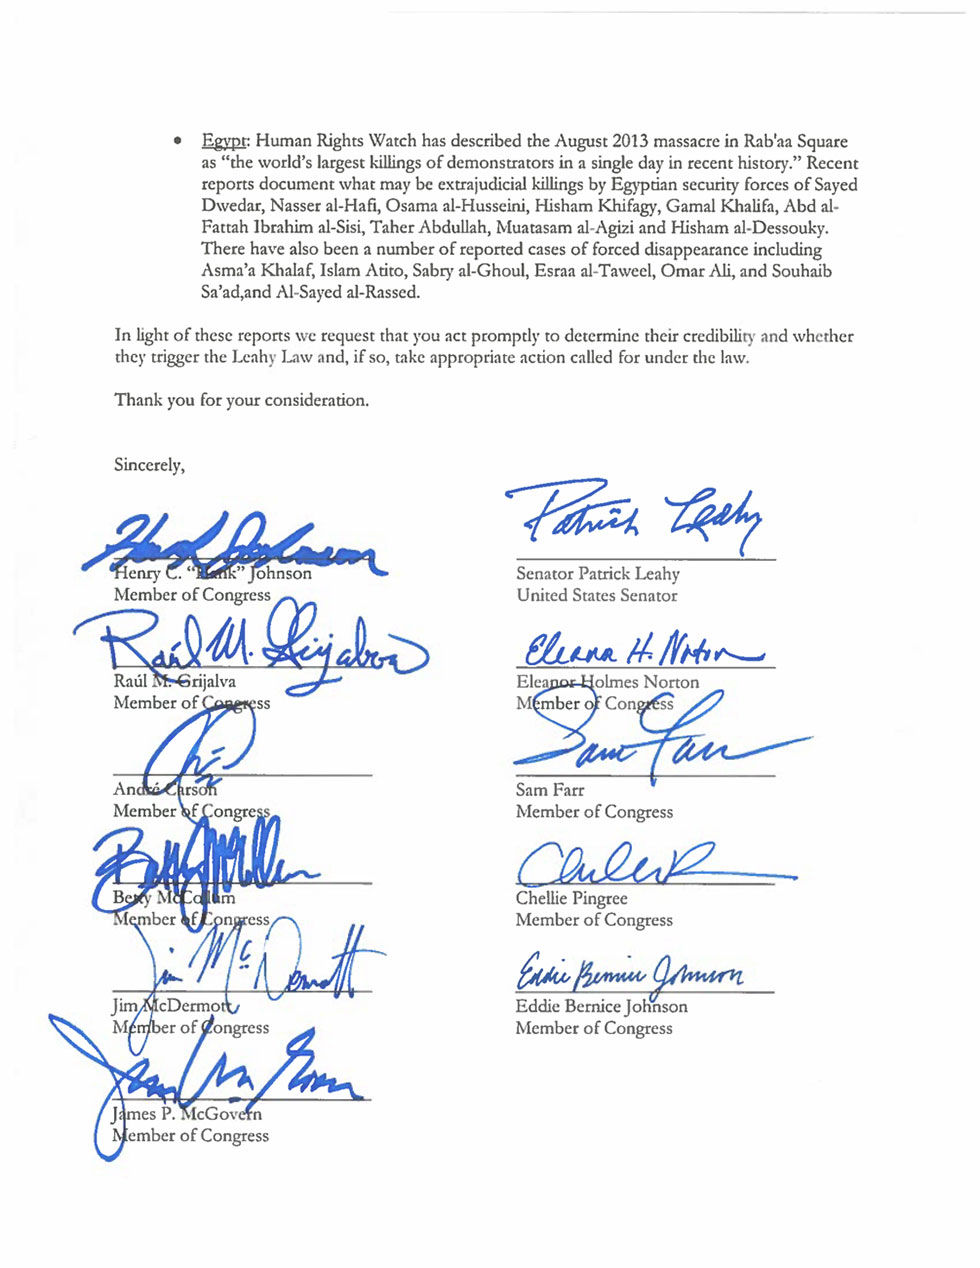 Congressional Representatives who signed Patrick Leahey's letter